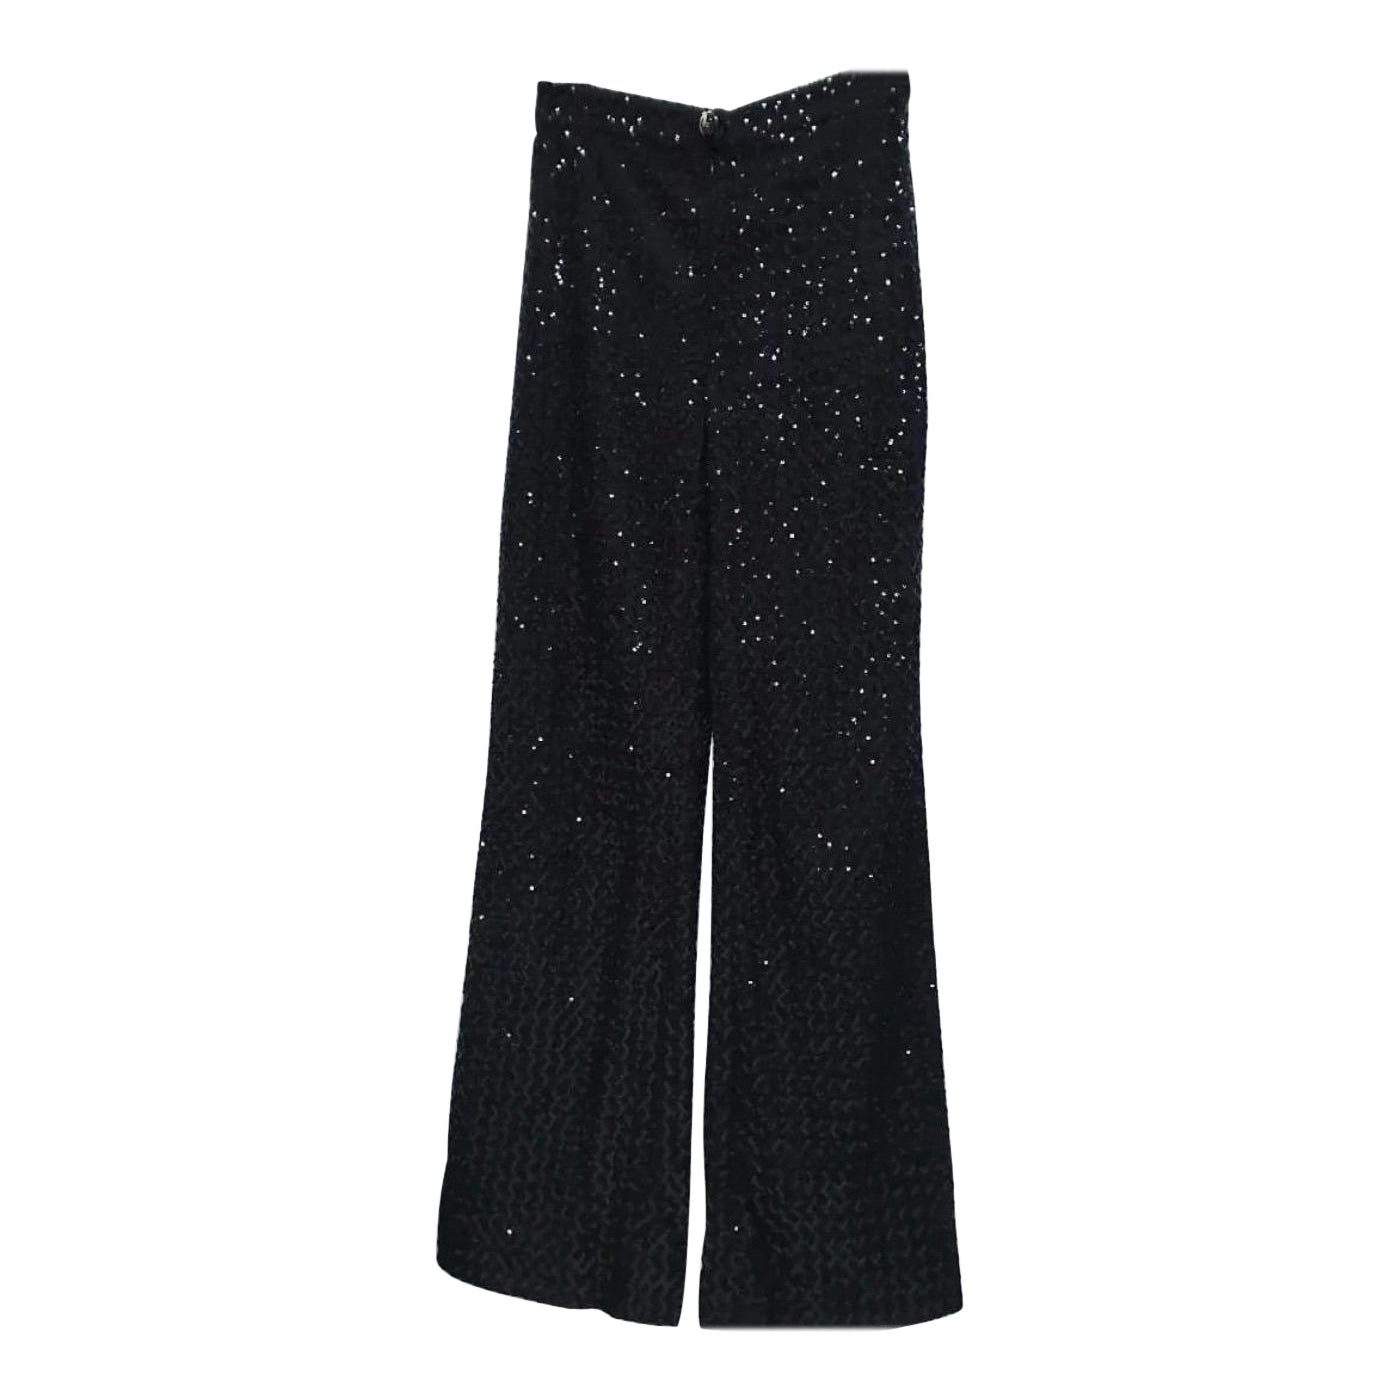 NWT Chanel Black Sequins Pants Trousers